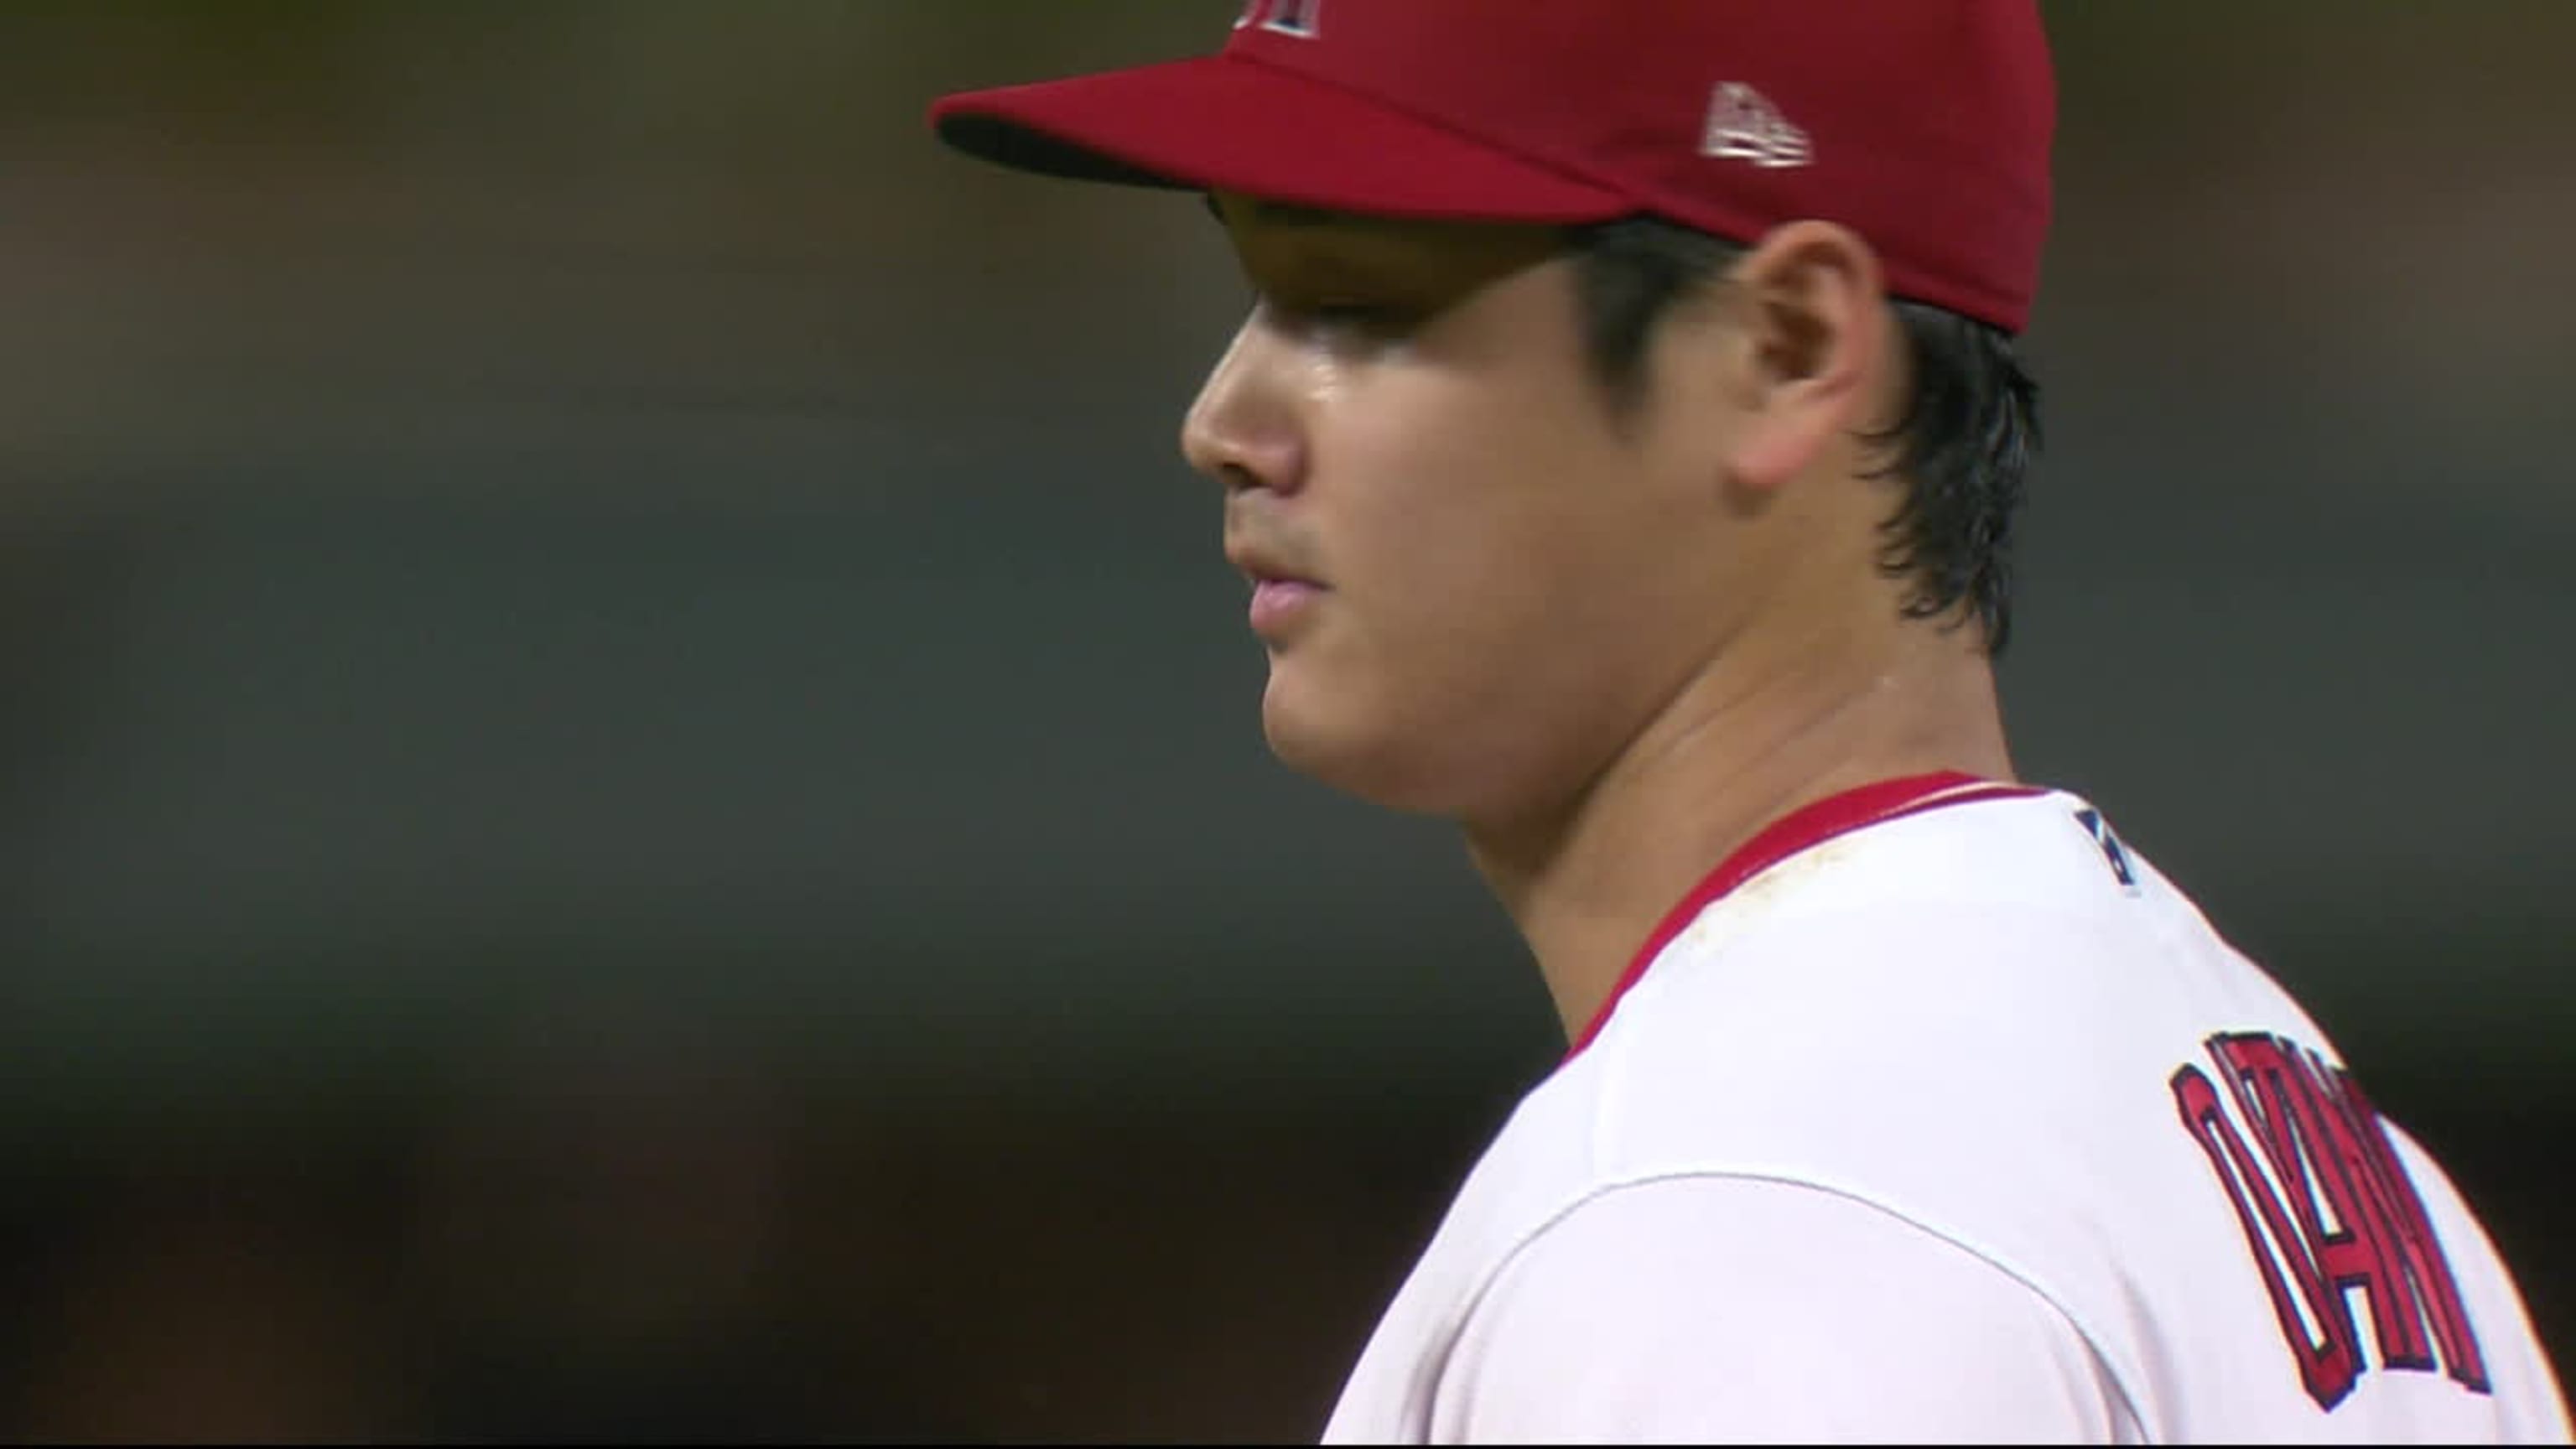 Ohtani becomes 2-way MLB All-Star for 3rd straight year